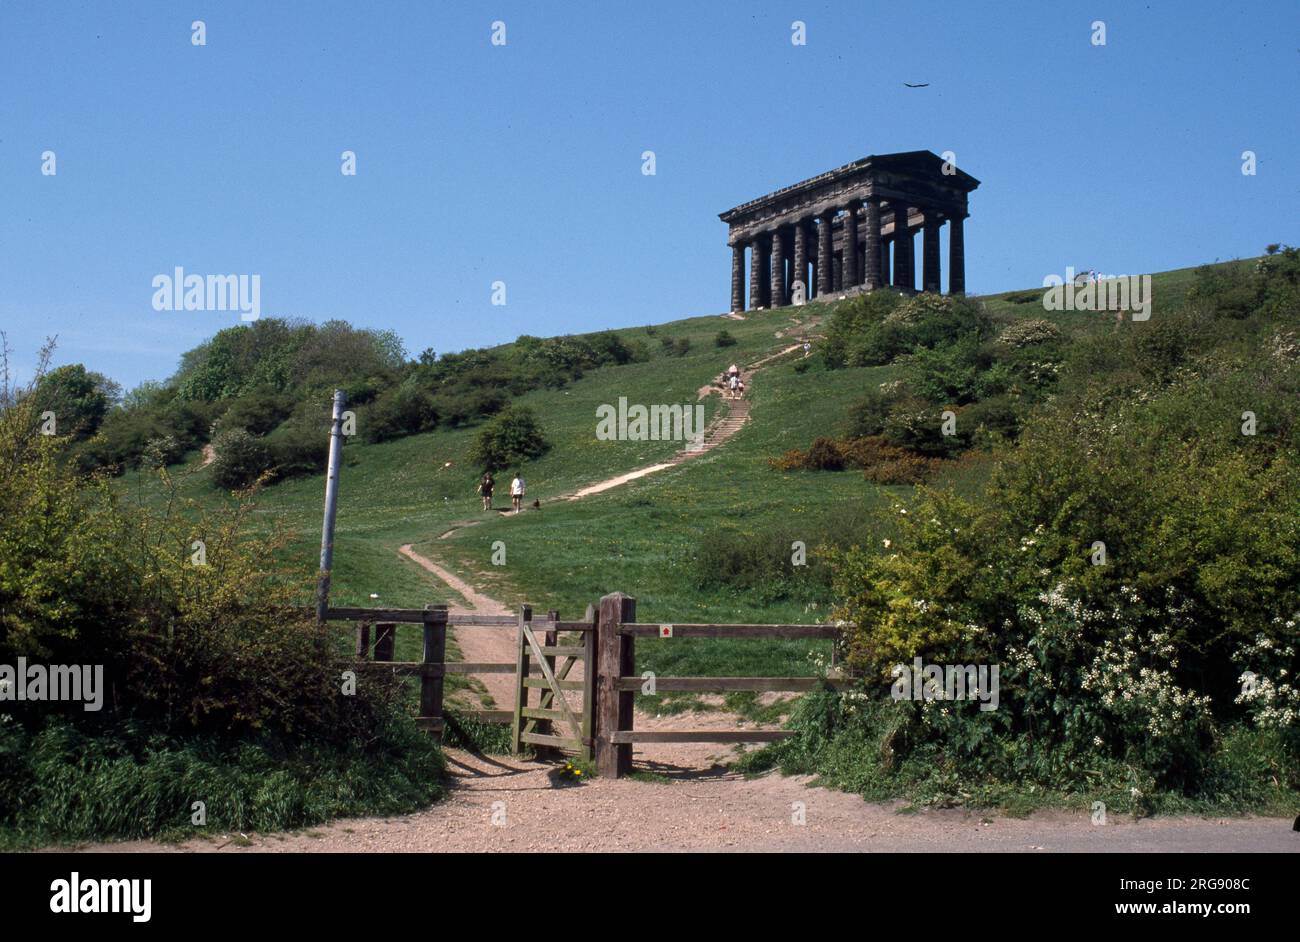 The Penshaw Monument, near Sunderland, Tyne and Wear, England, was designed by John and Benjamin Green and is dedicated to John George Lambton, 1st Earl of Durham. Built in 1844. Photograph taken 2004. Stock Photo